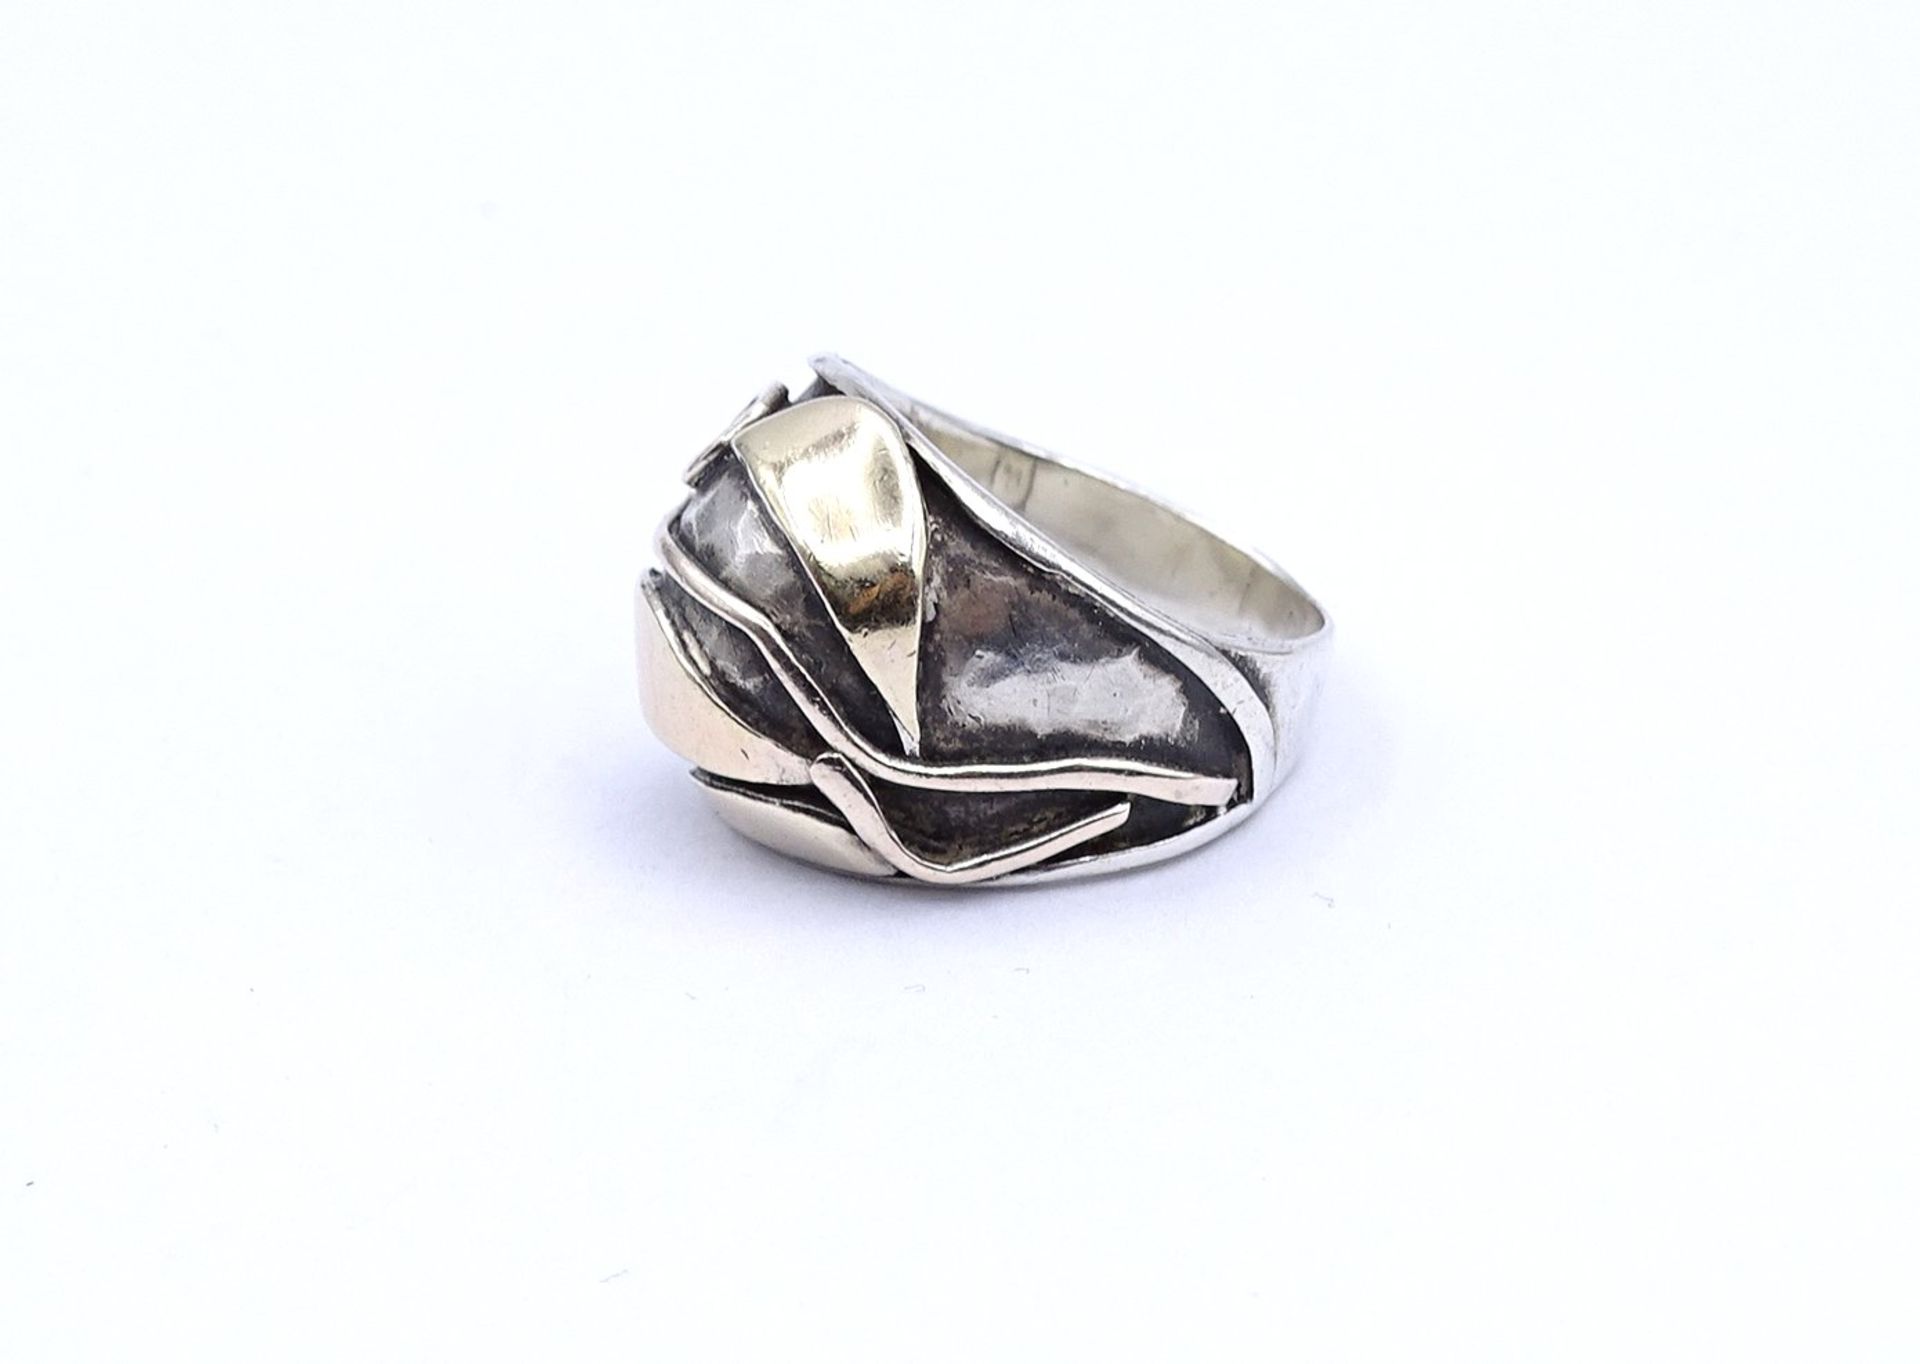 Silber + Gold Ring, AB bez. 6,6g., RG 49/50 - Image 2 of 4